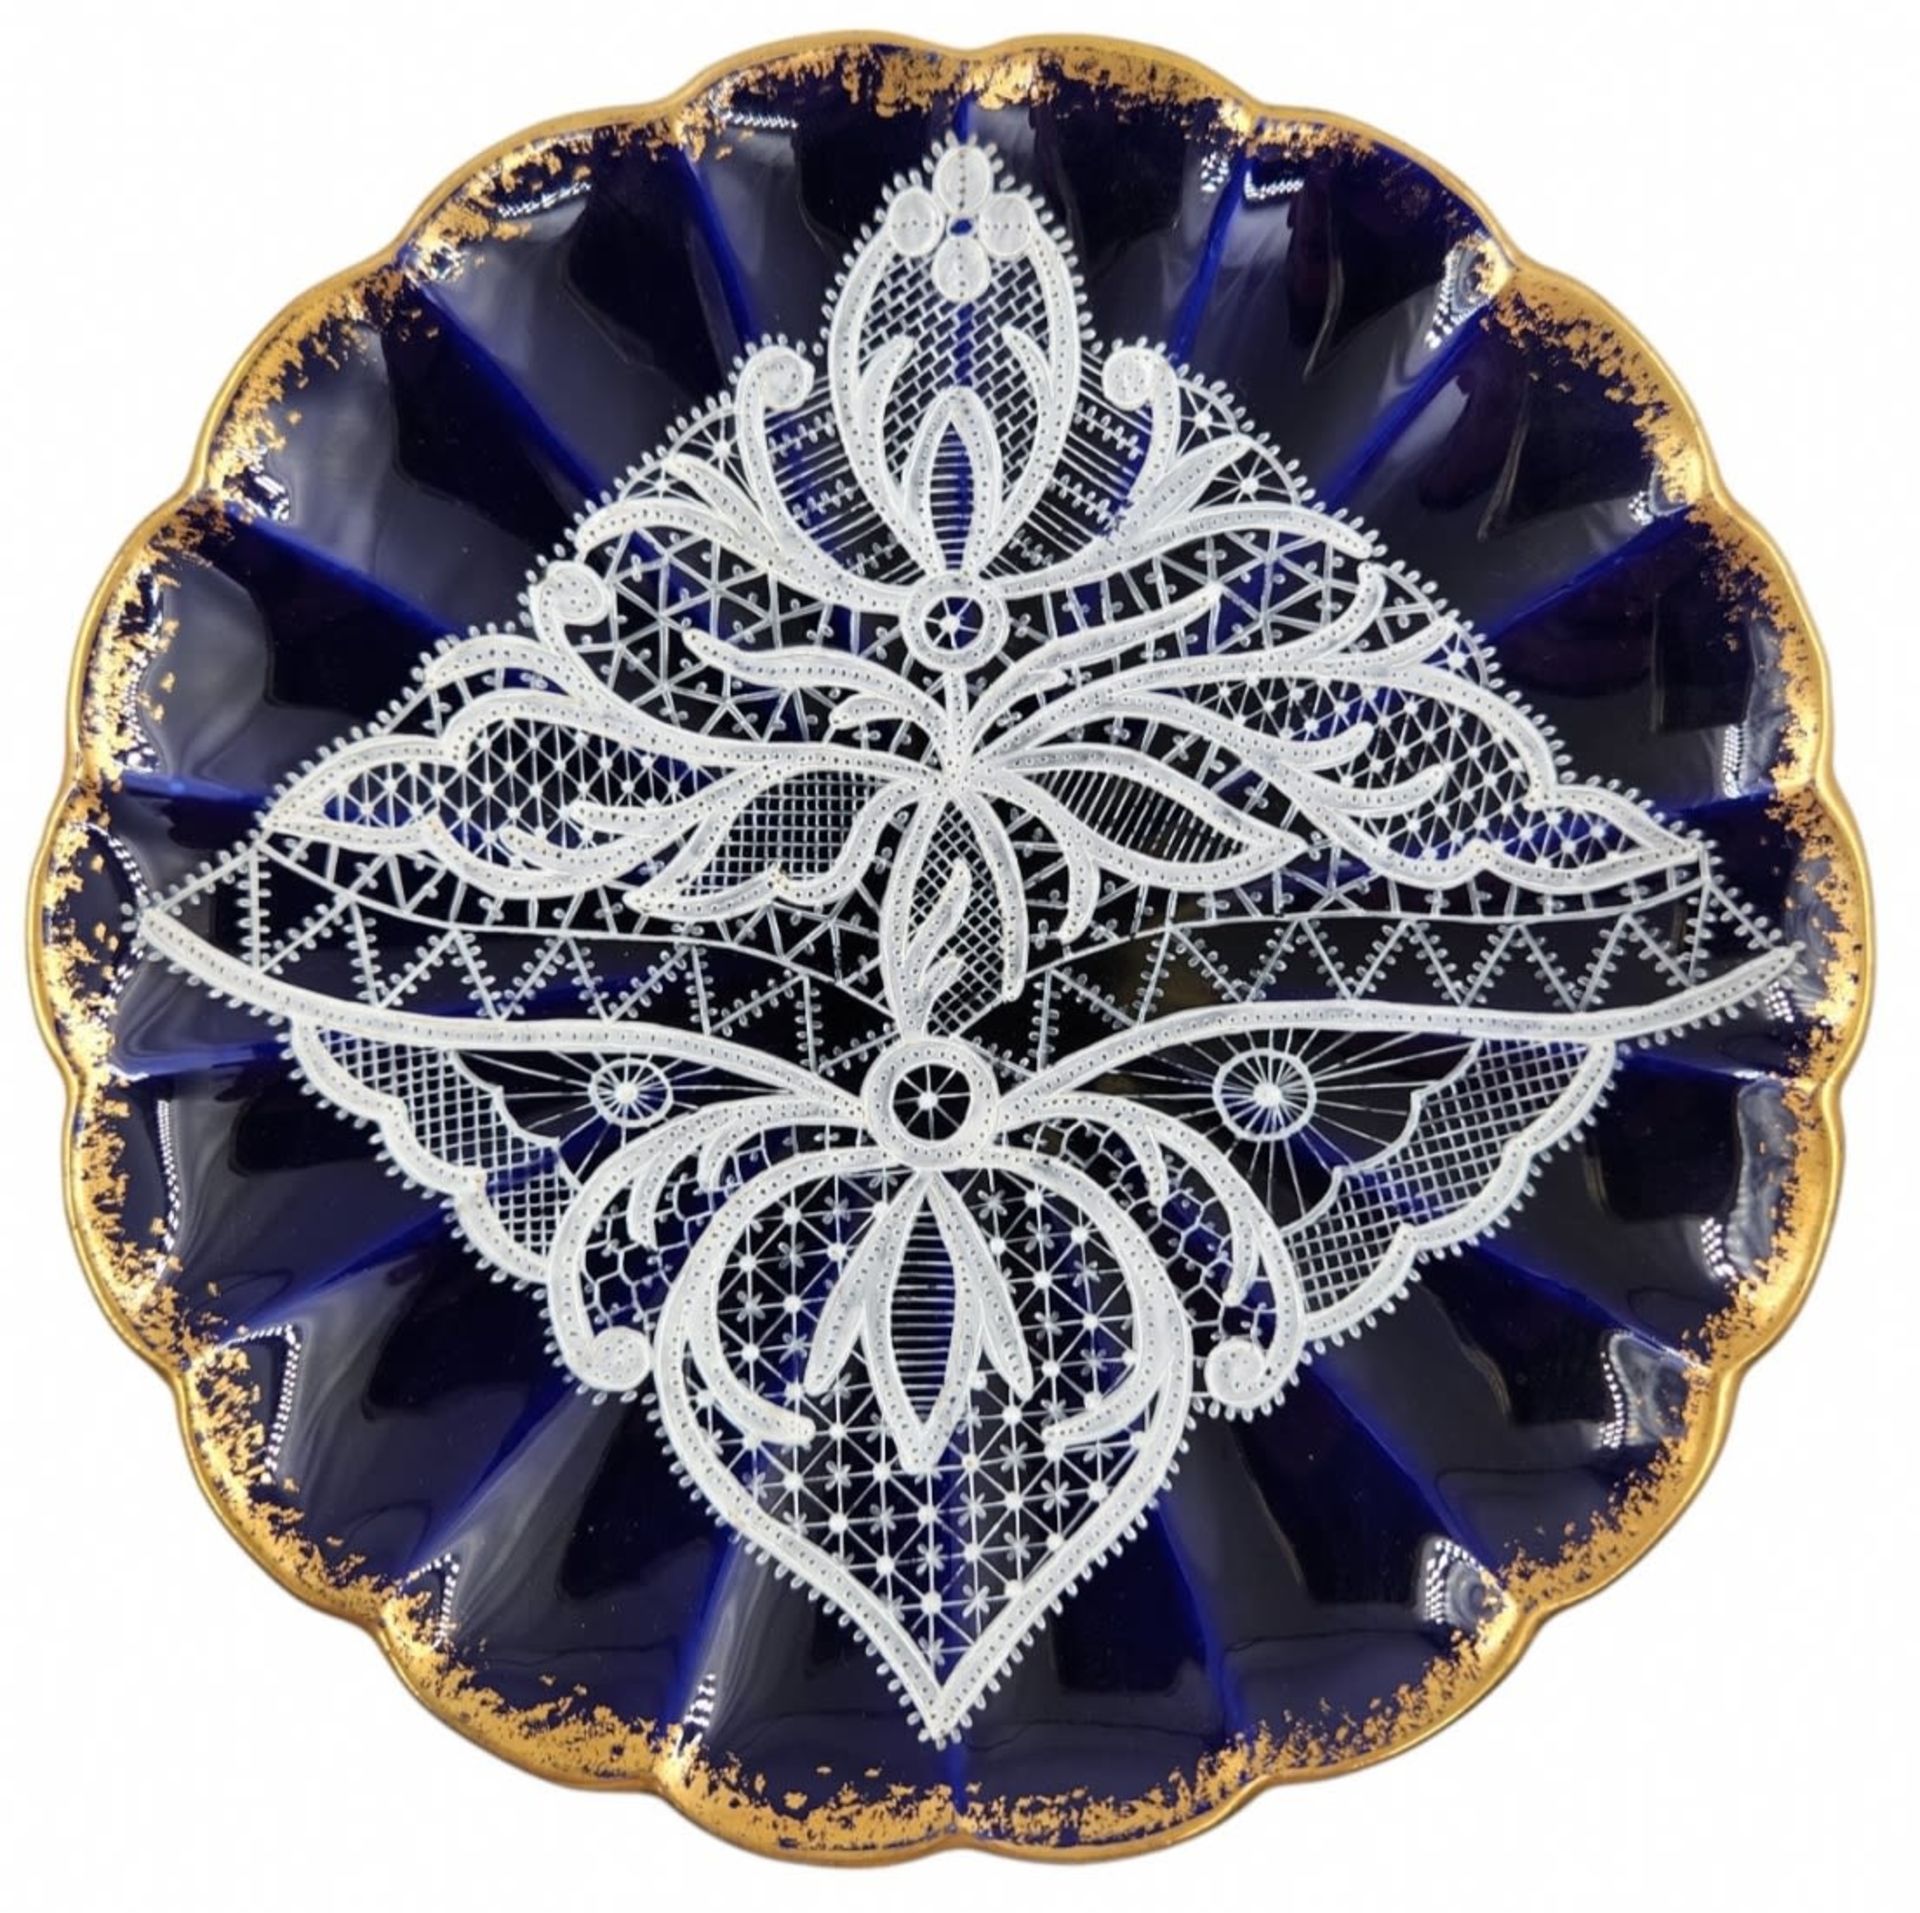 4 porcelain plates, decorated with white enamel in a lace napkin pattern and a gold saying on blue - Image 2 of 5